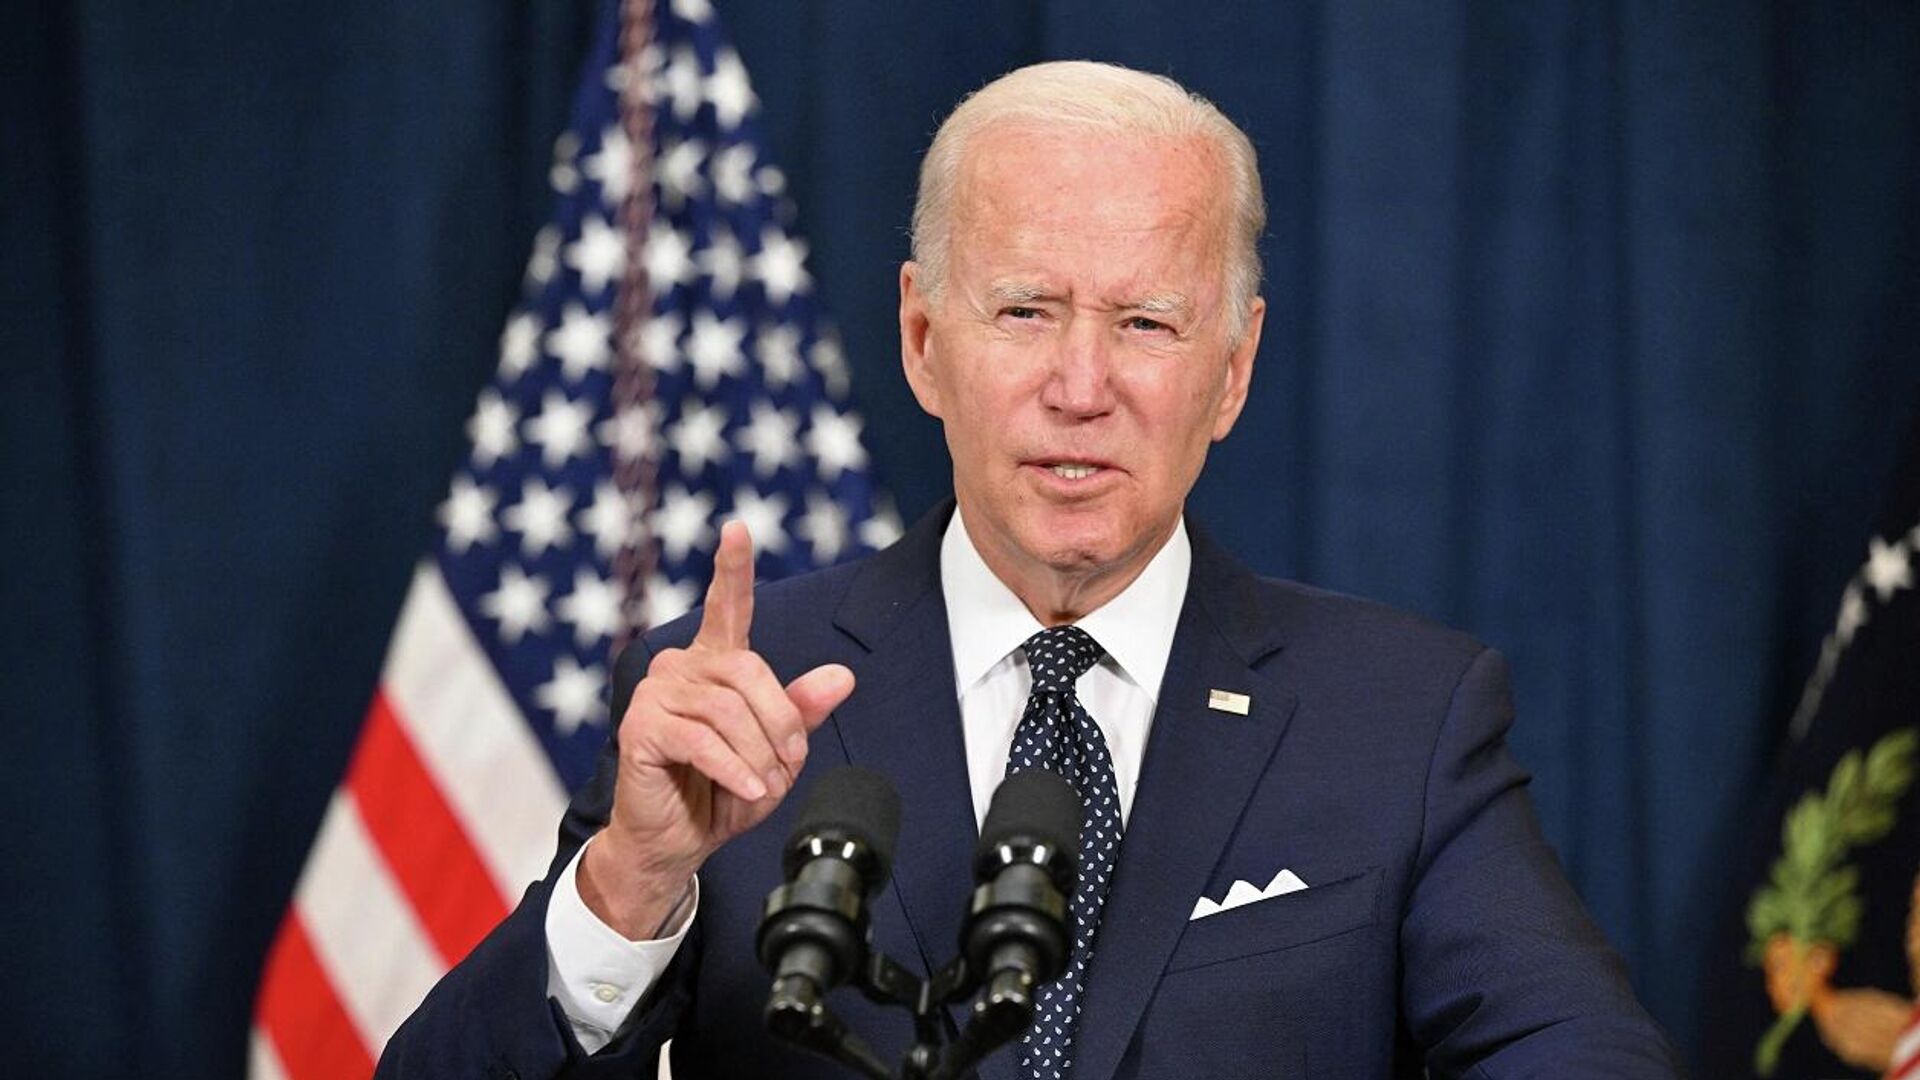 Biden announces the extension of the state of emergency in Iraq and refers to extraordinary threats